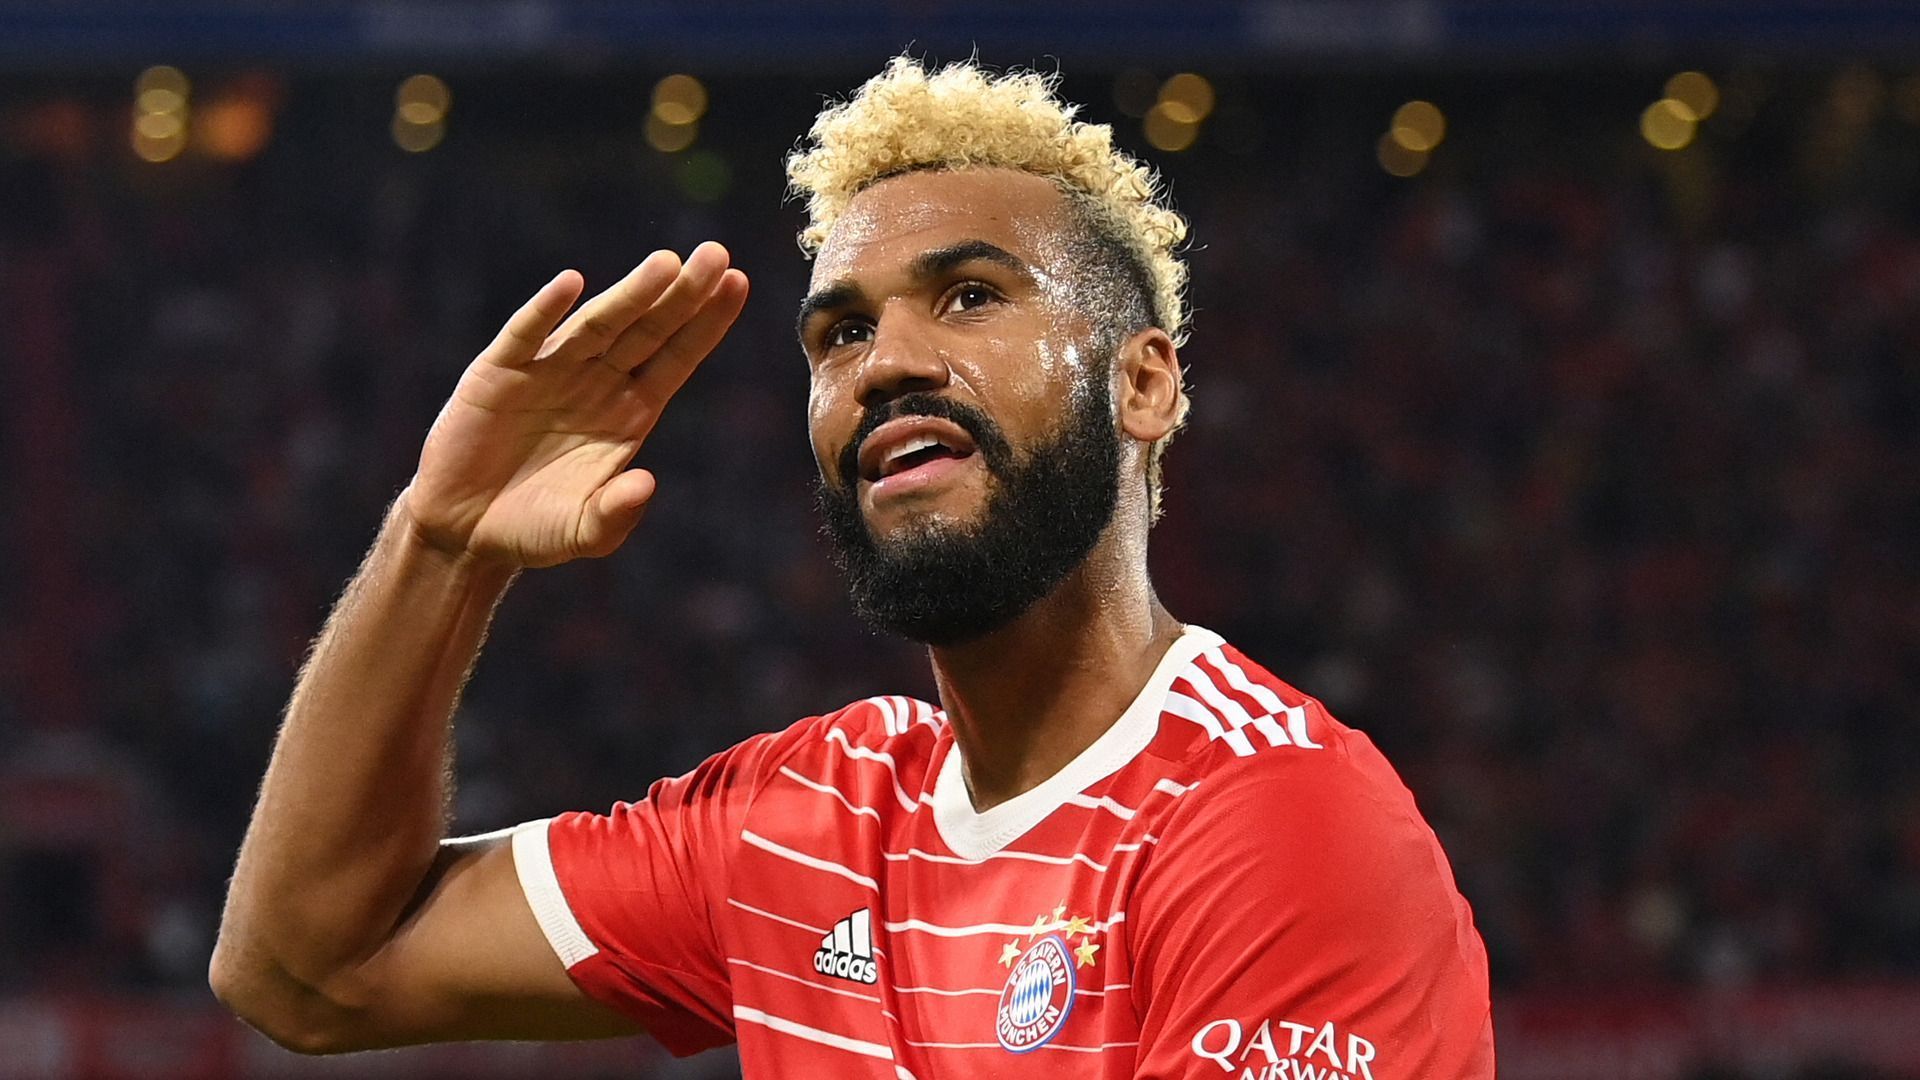 Choupo-Moting will be a key player for Bayern on Wednesday